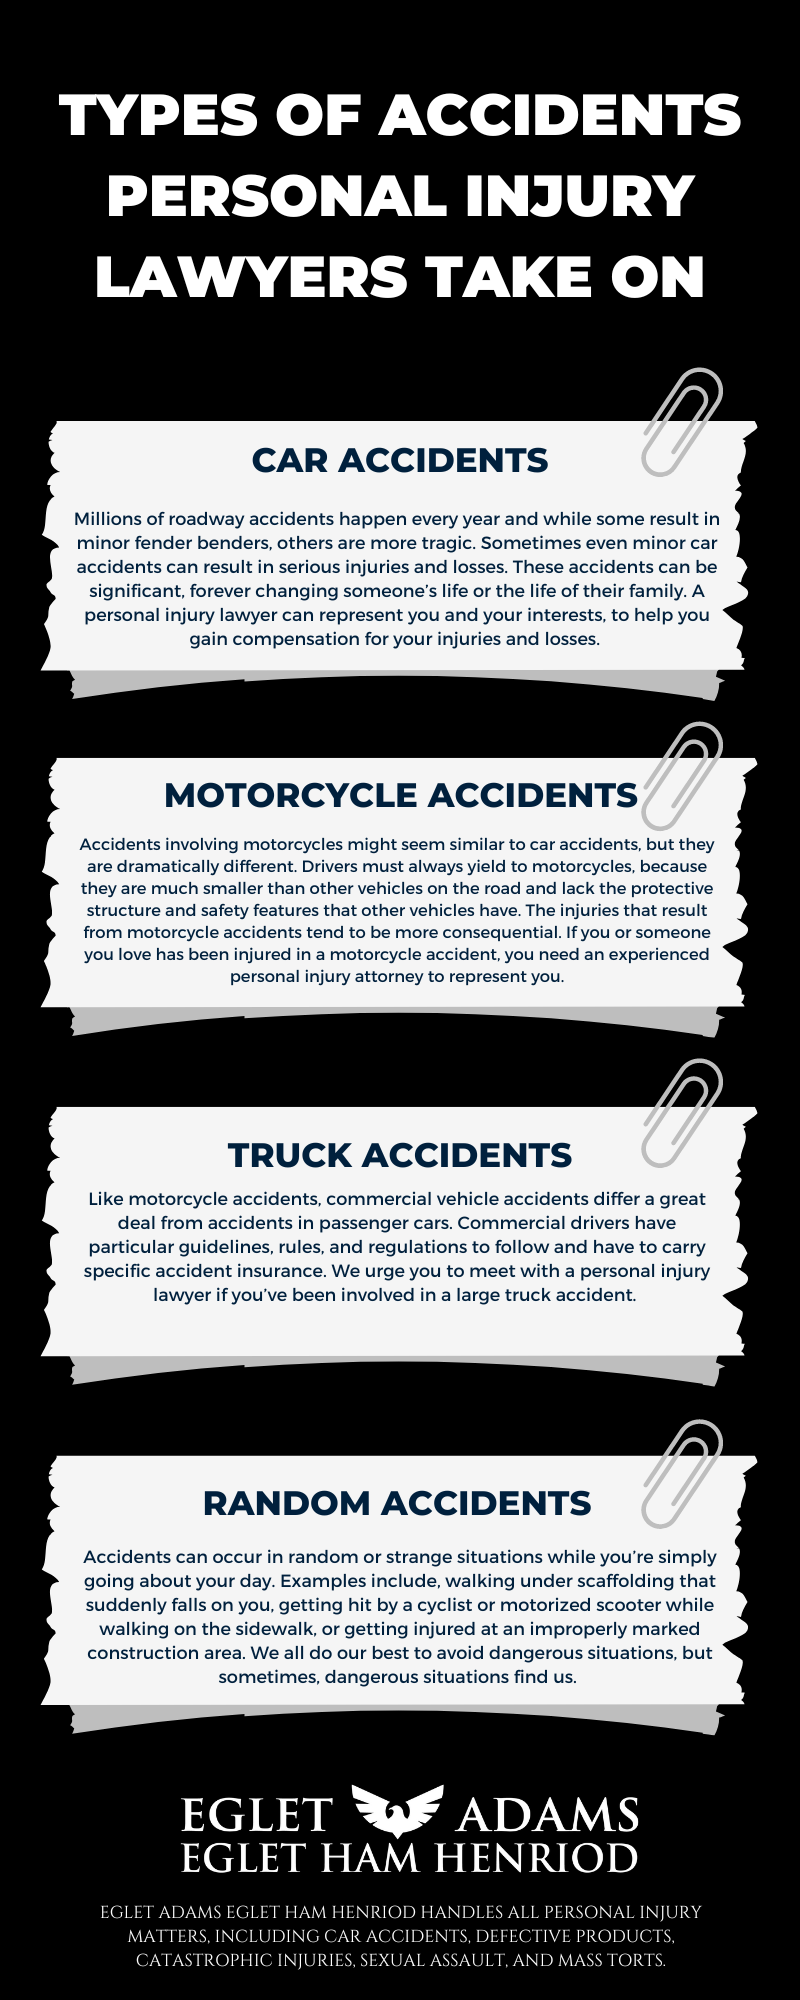 TYPES OF ACCIDENTS PERSONAL INJURY LAWYERS TAKE ON INFOGRAPHIC